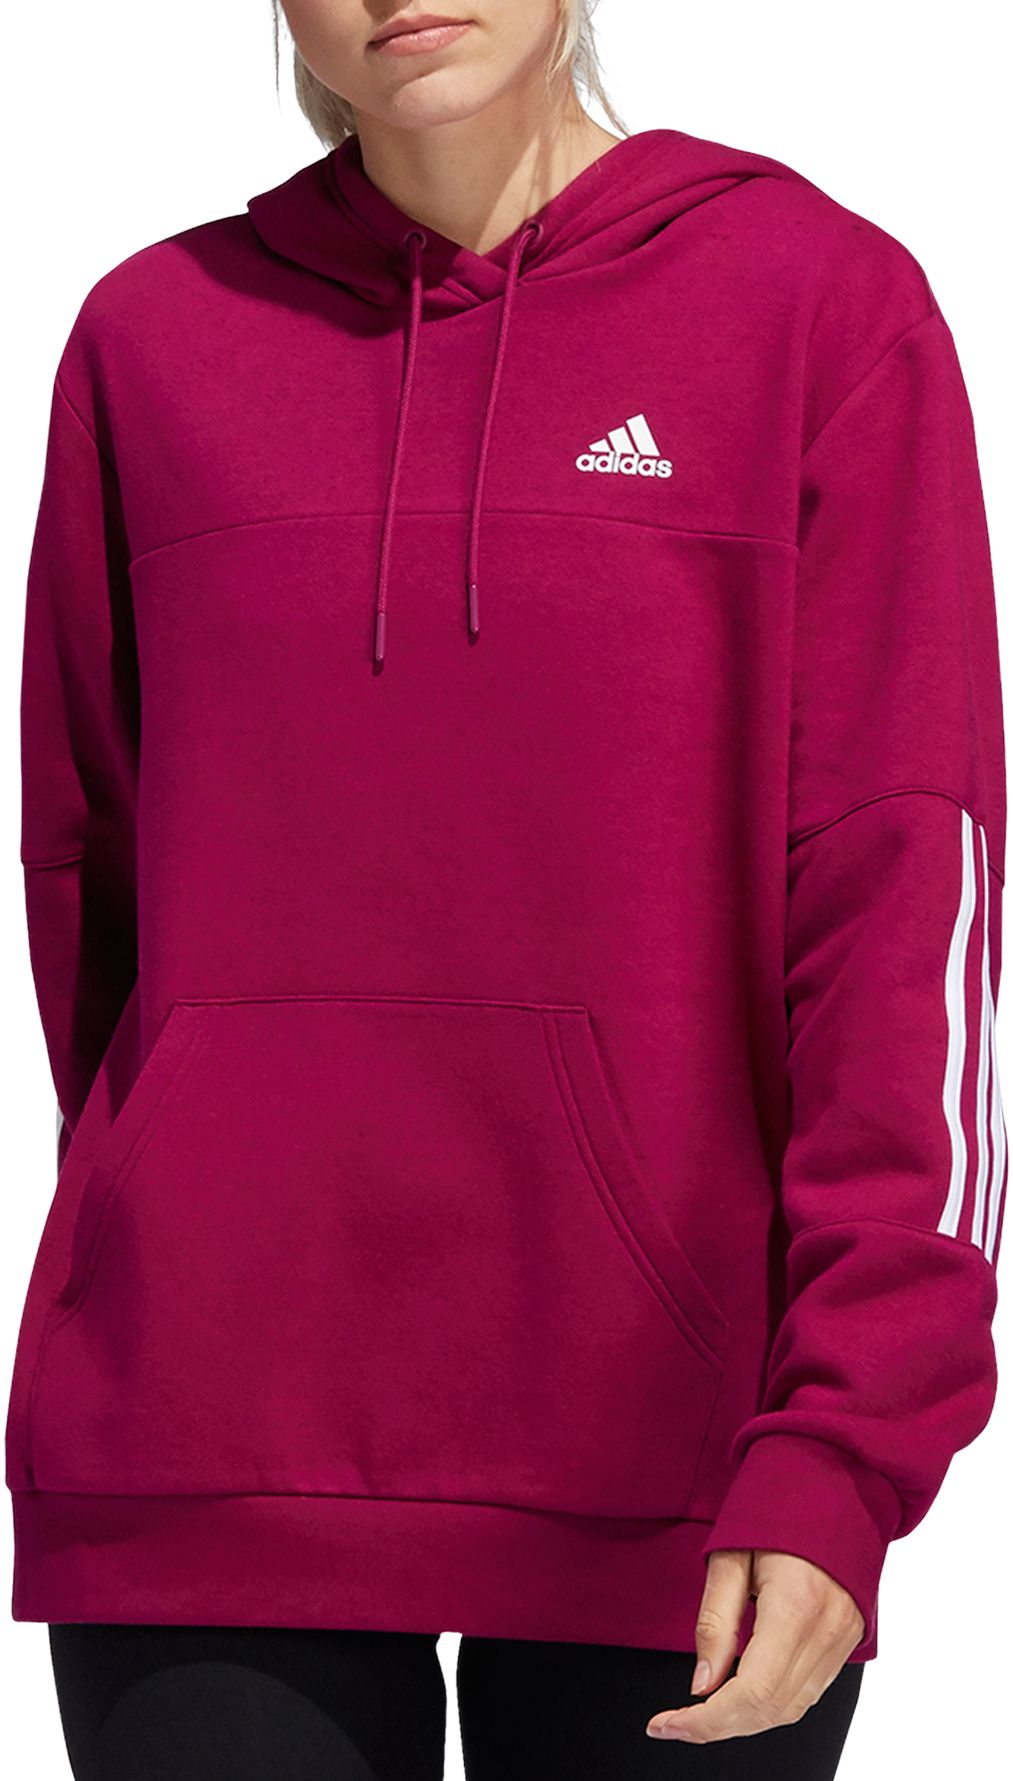 pink adidas outfit women's